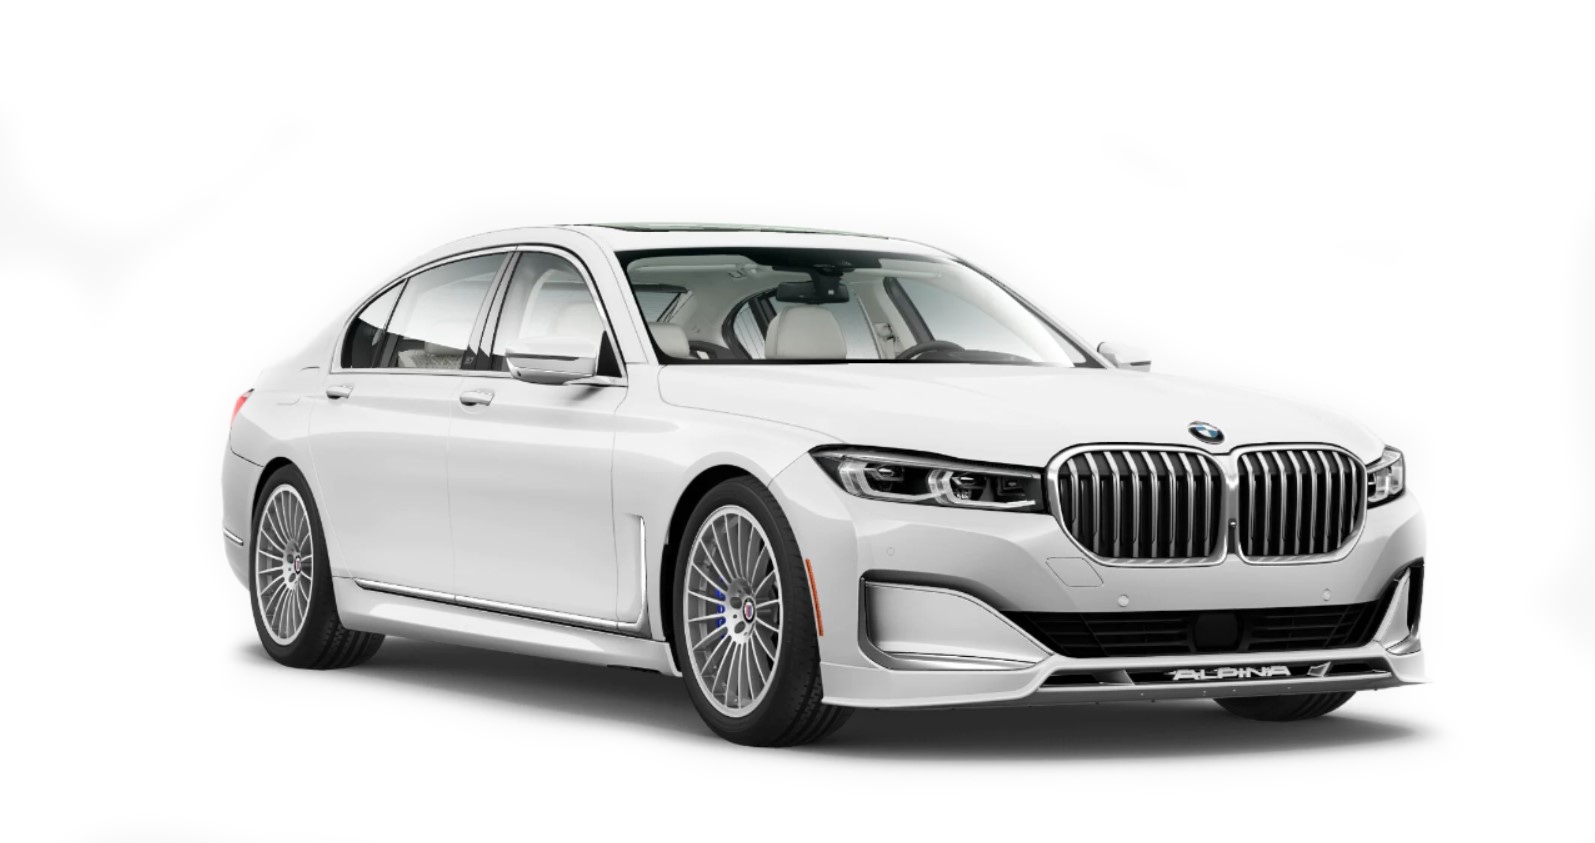 2021 BMW Alpina B7 xDrive Full Specs, Features and Price | CarBuzz